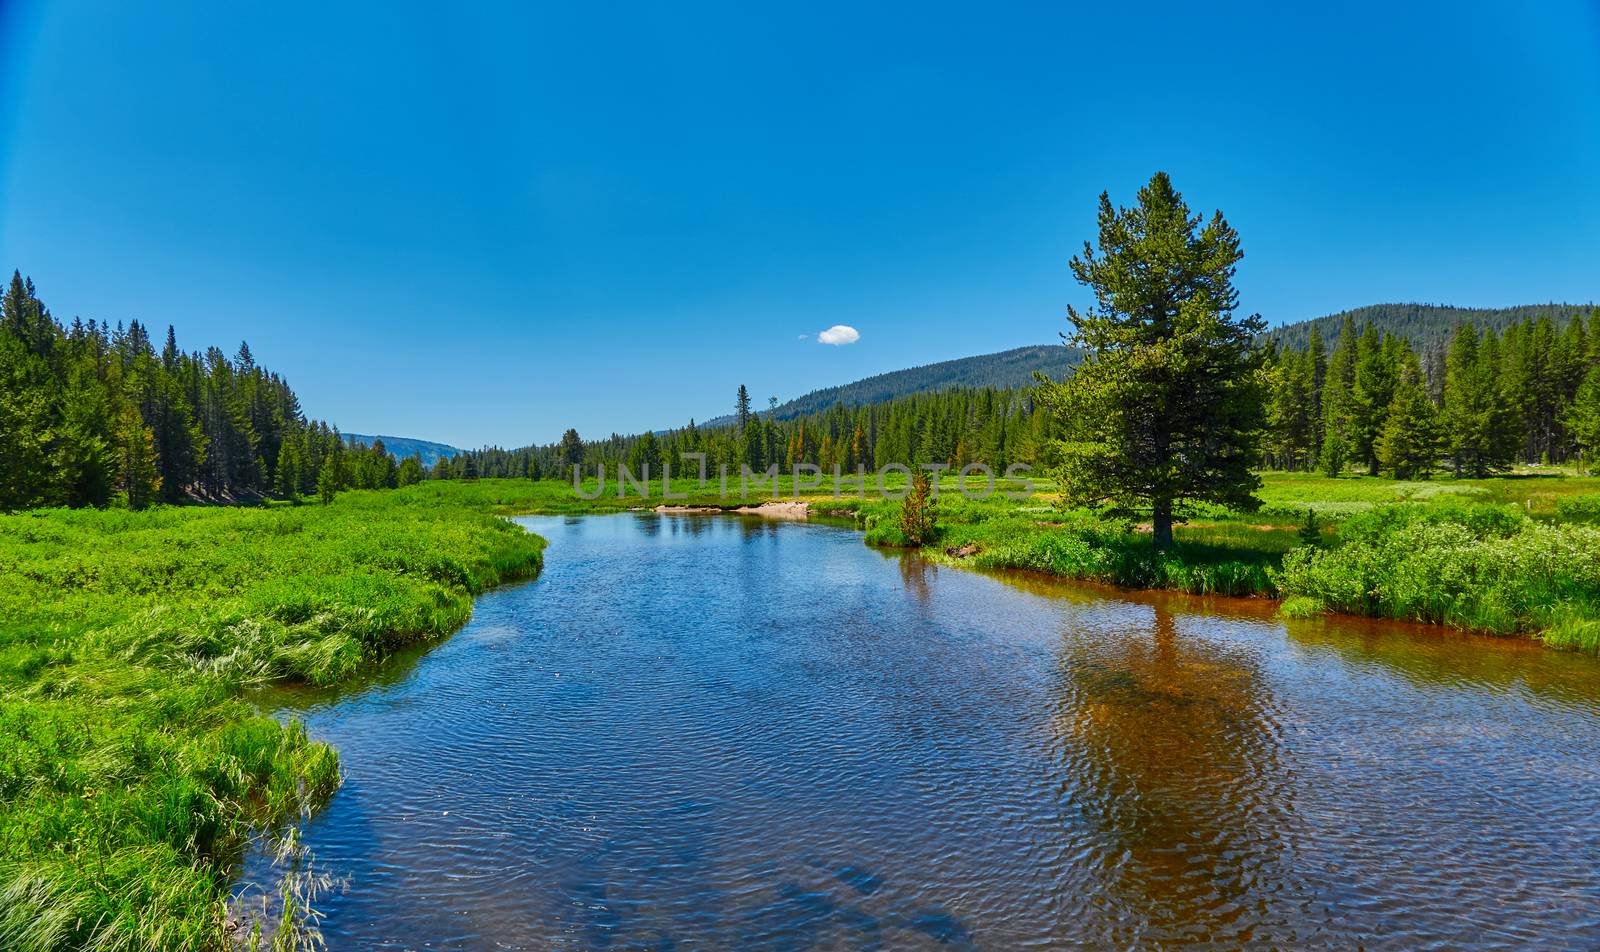 Johnson Creek flowing through a alpine meadow in the Sawtooth Na by patrickstock